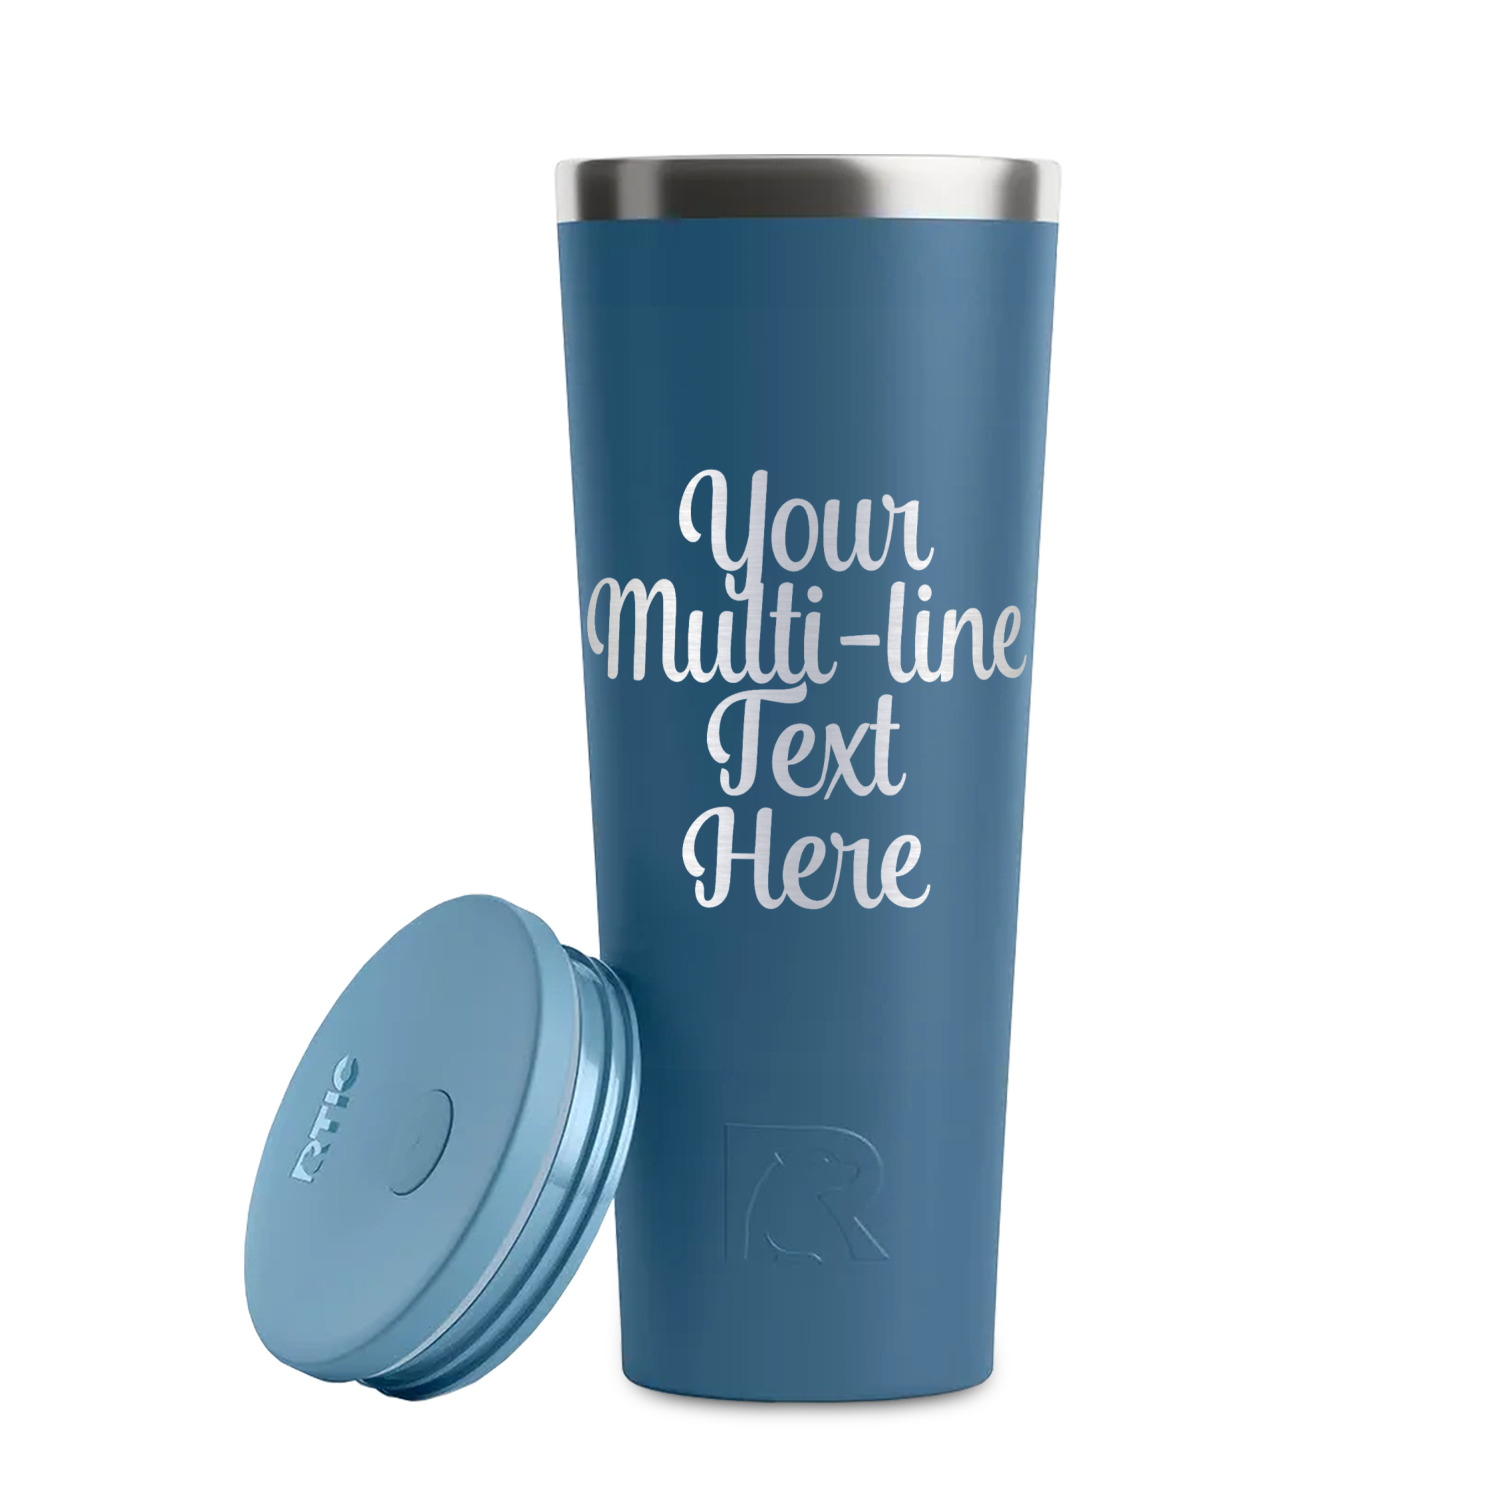 https://www.youcustomizeit.com/common/MAKE/837471/Multiline-Text-Steel-Blue-RTIC-Everyday-Tumbler-28-oz-Lid-Off.jpg?lm=1698259271